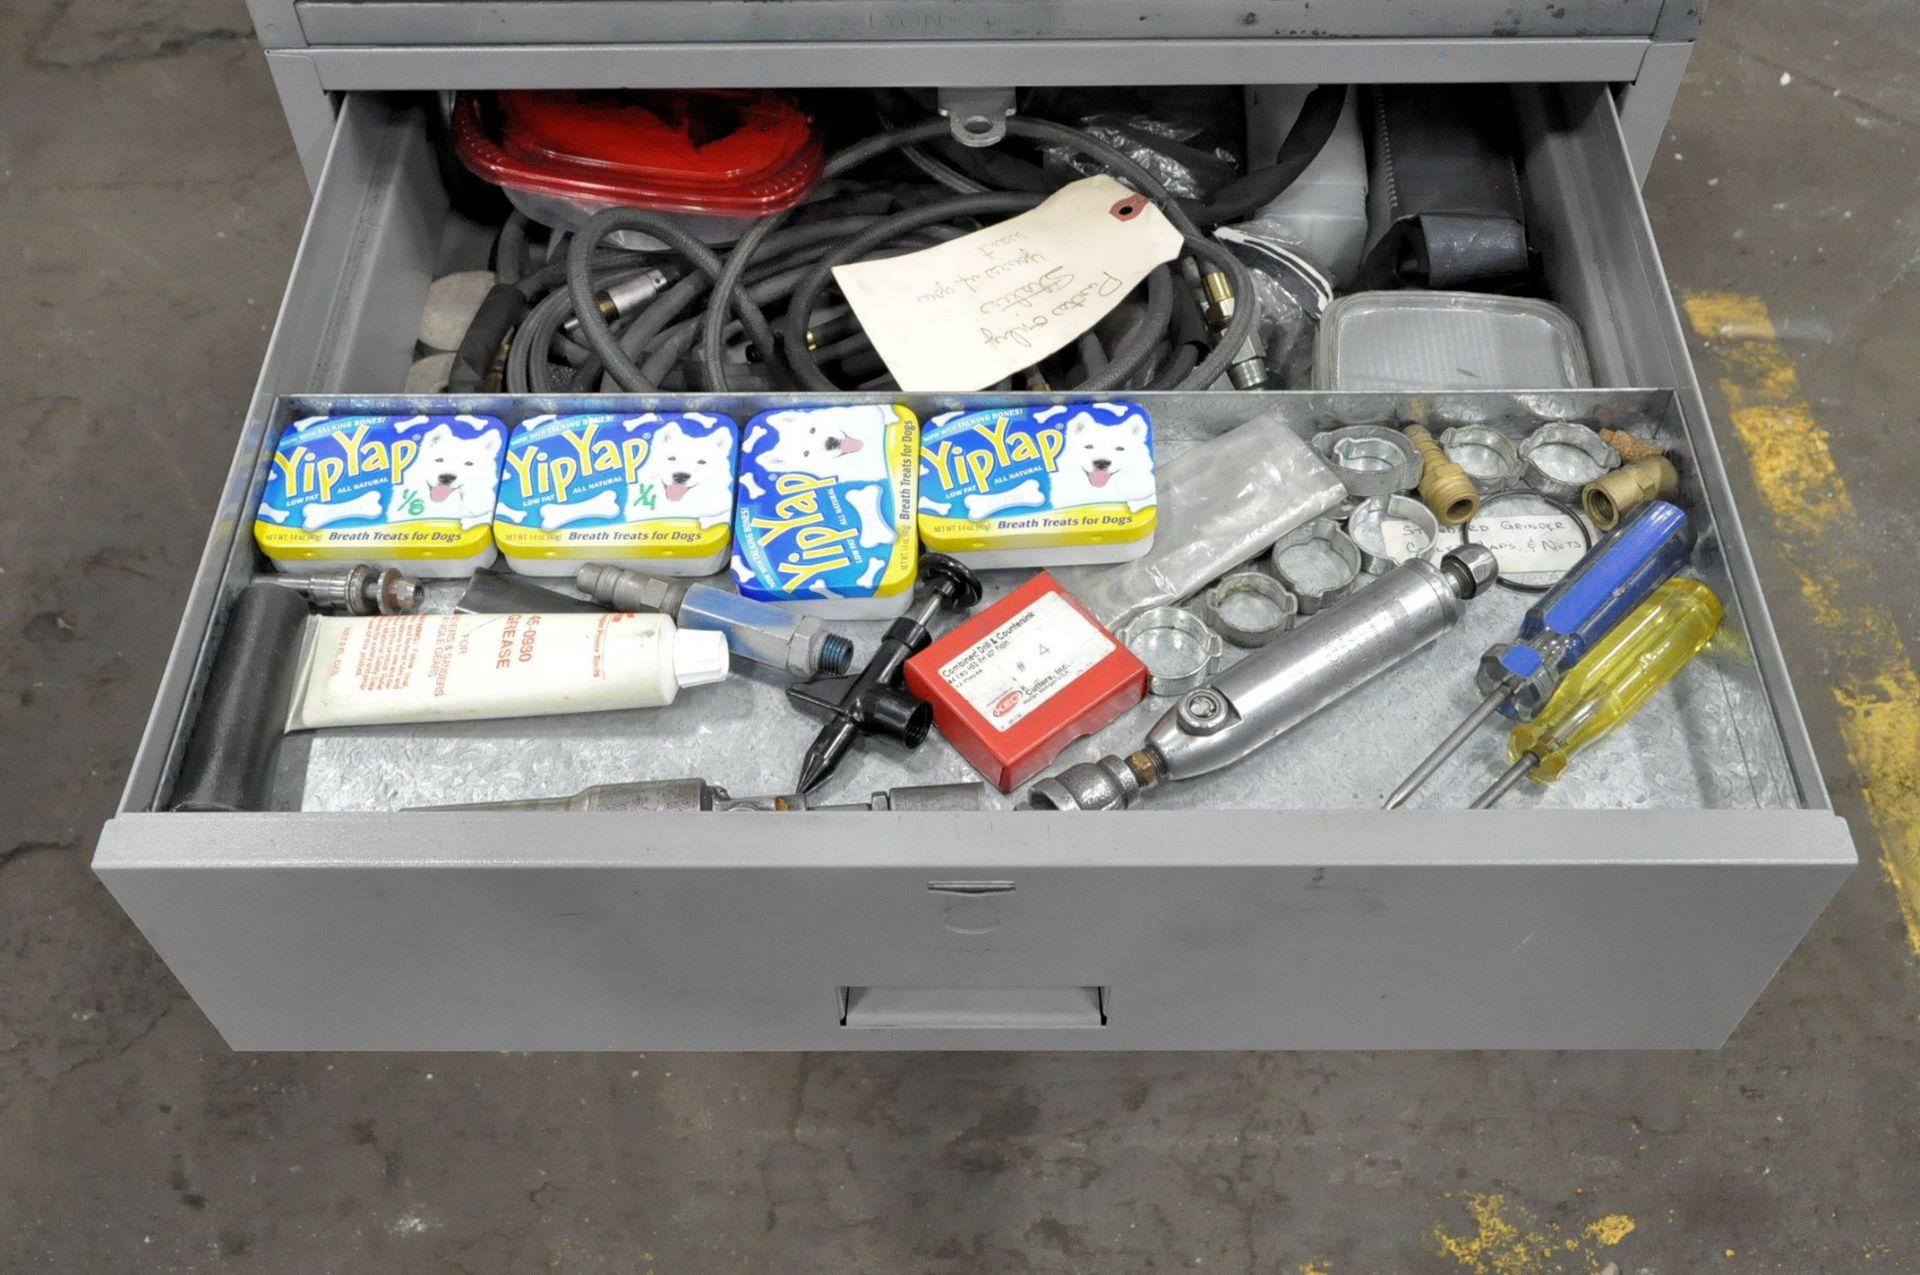 4-Drawer Rolling Cabinet with Misc. Tools Contents, (E-7), (Yellow Tag) - Image 3 of 5